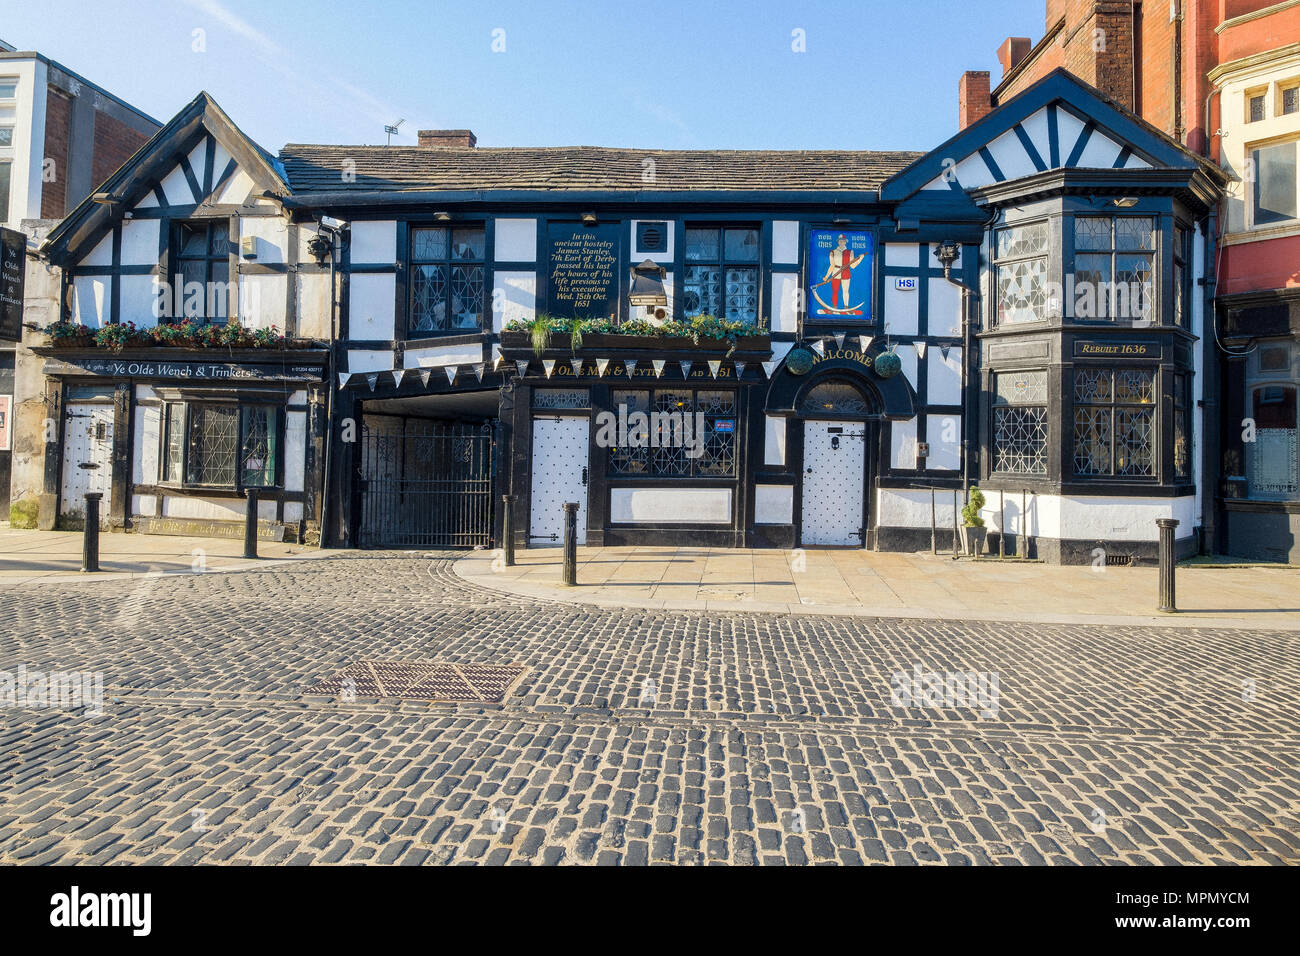 Man and Scythe public house Bolton Lancashire one of the oldest pubs in  England Stock Photo - Alamy